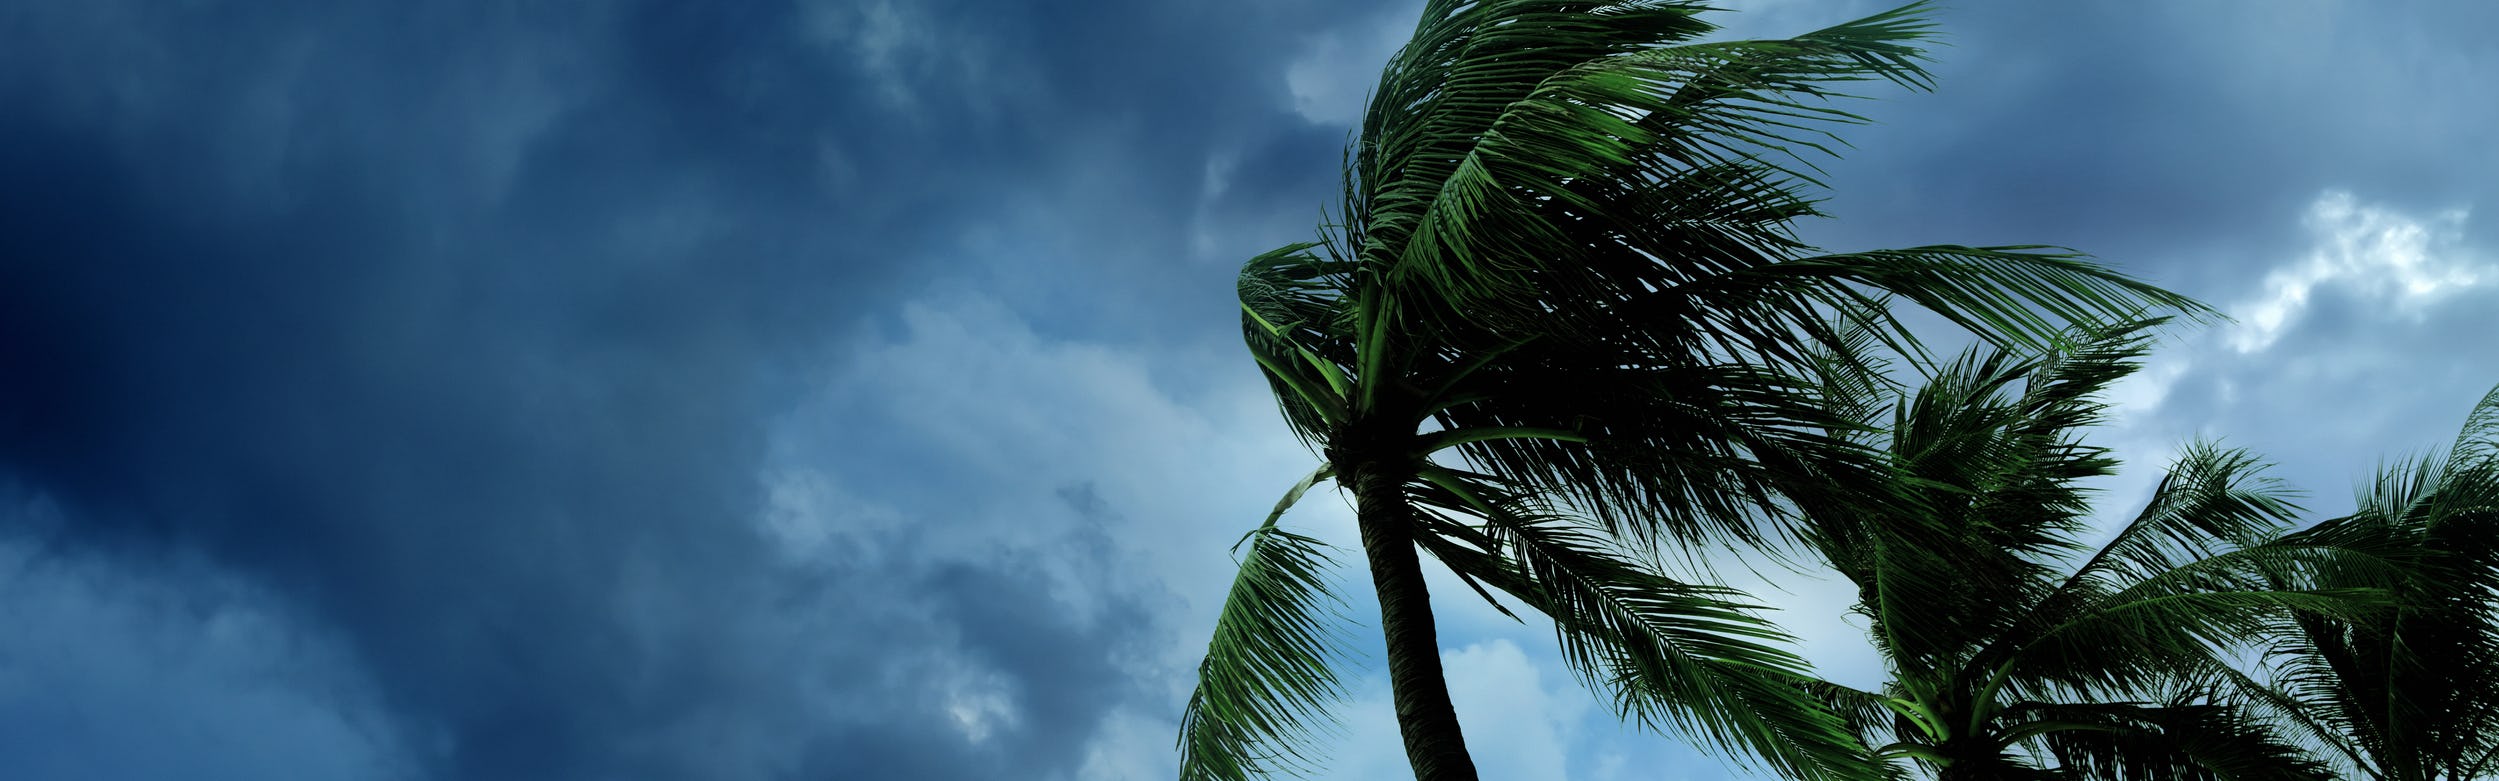 Palm trees with ominous clouds